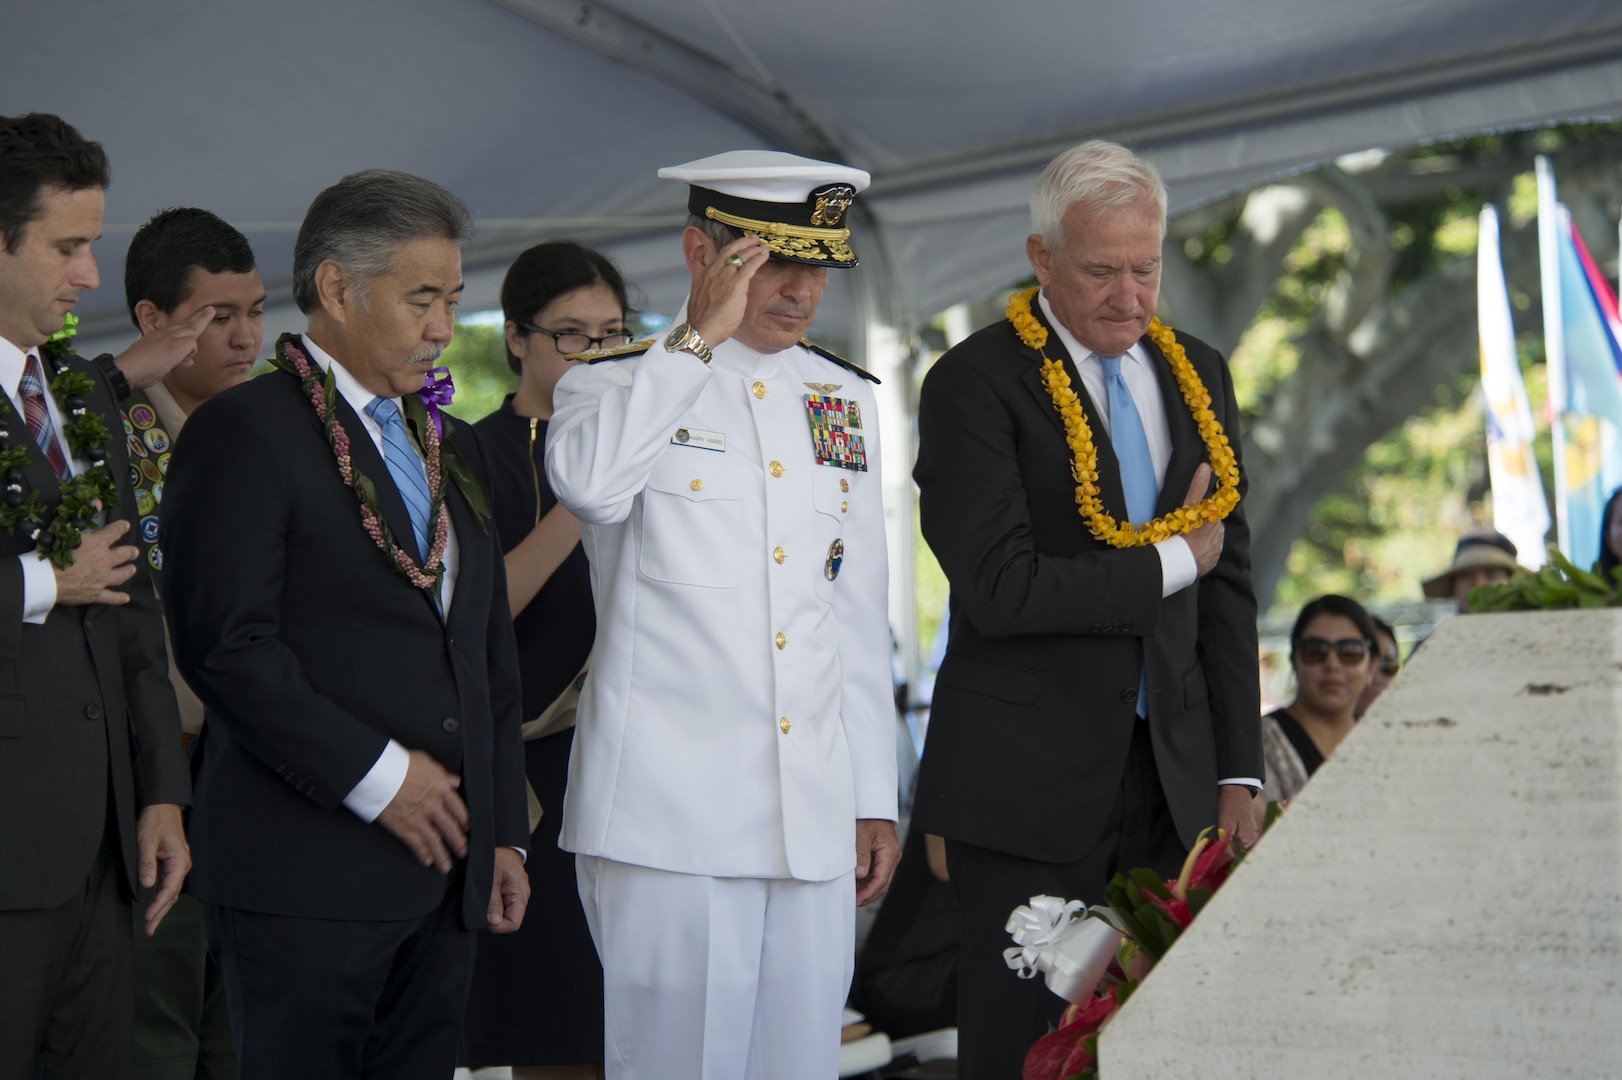 160531-N-UG232-345 Honolulu, Hawaii (May 31, 2016) Adm. Harry Harris, Commander of U.S. Pacific Command, salutes after laying a wreath during the Honolulu Mayor's Memorial Day Ceremony at the National Memorial Cemetery of the Pacific. U.S. Pacific Command's mission is to enhance stability in the Indo-Asia-Pacific by promoting security cooperation and deterring aggression.